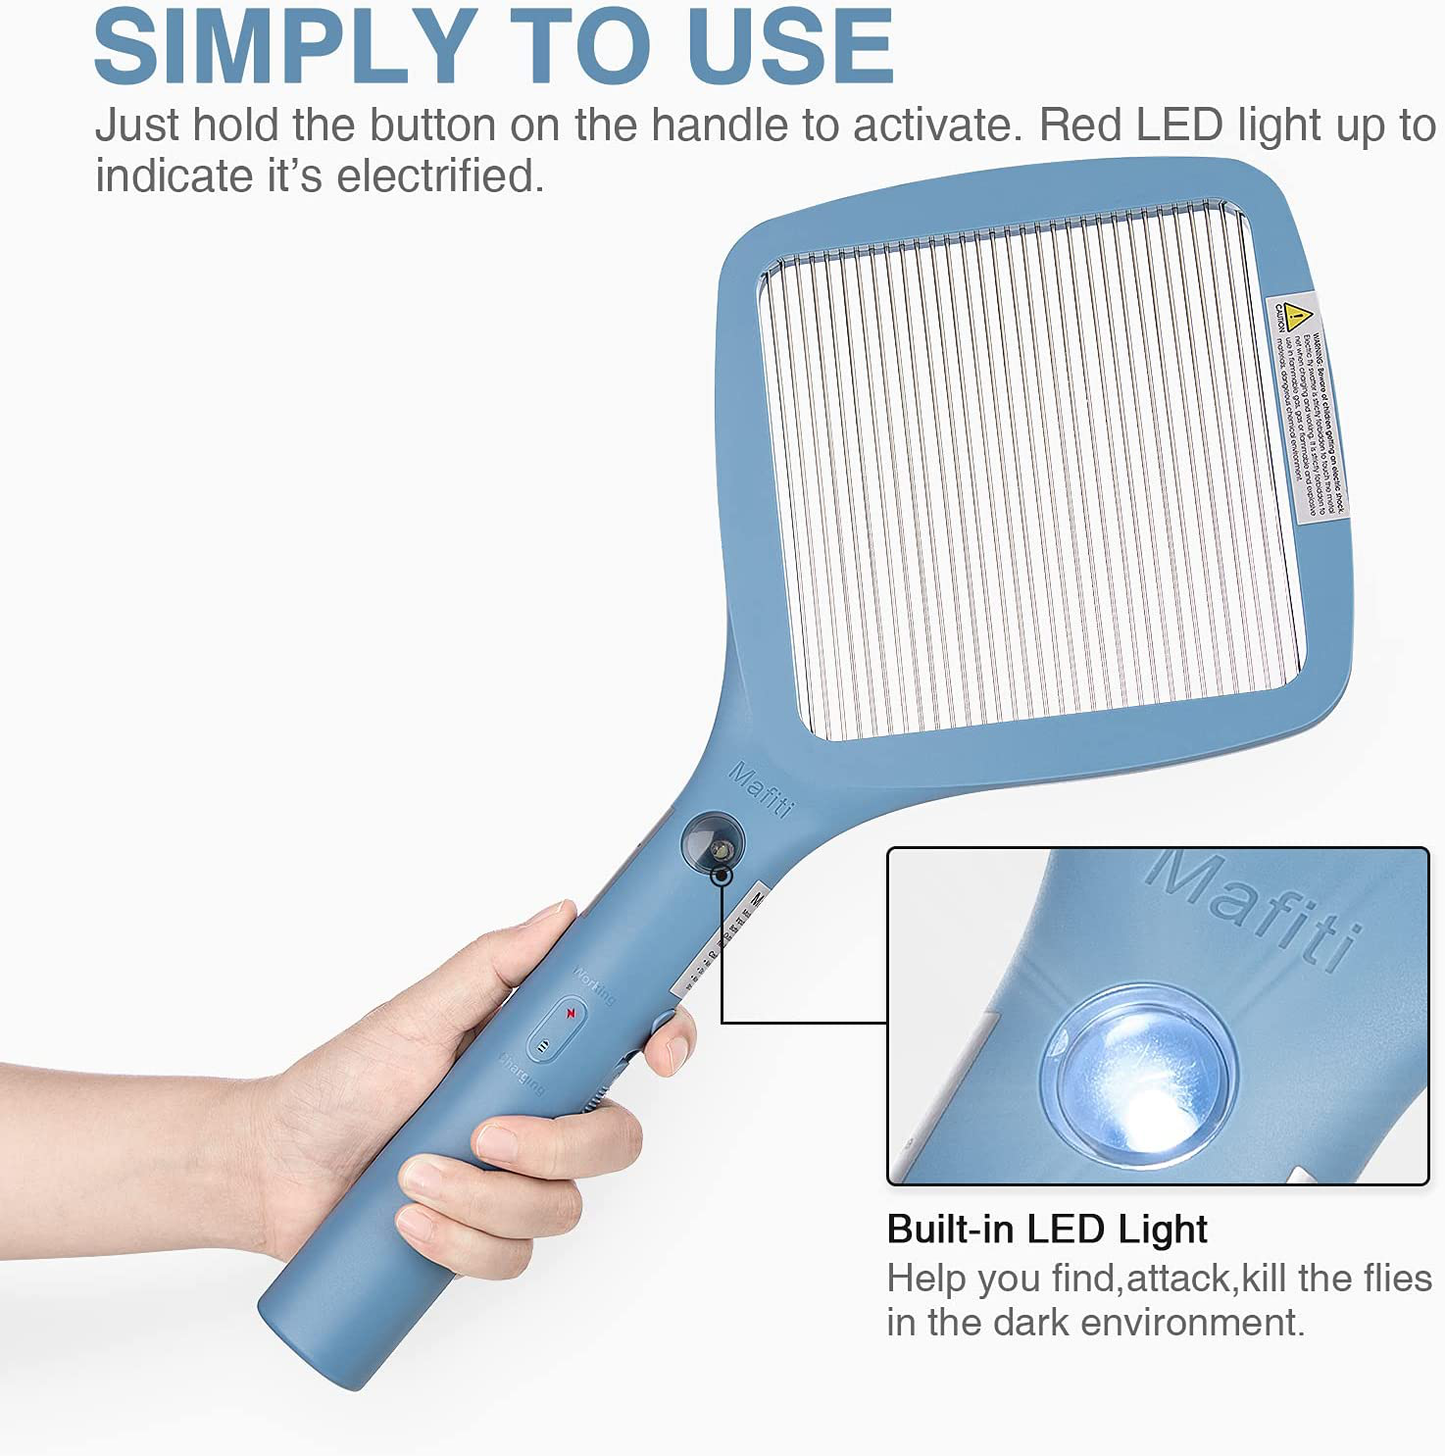 mafiti Electric Fly Swatter, Mosquito Zapper, Bug Zapper Racket Fly Killer Indoor Outdoor, Rechargeable, Light, Pest Control, Camping Accessories (Blue)